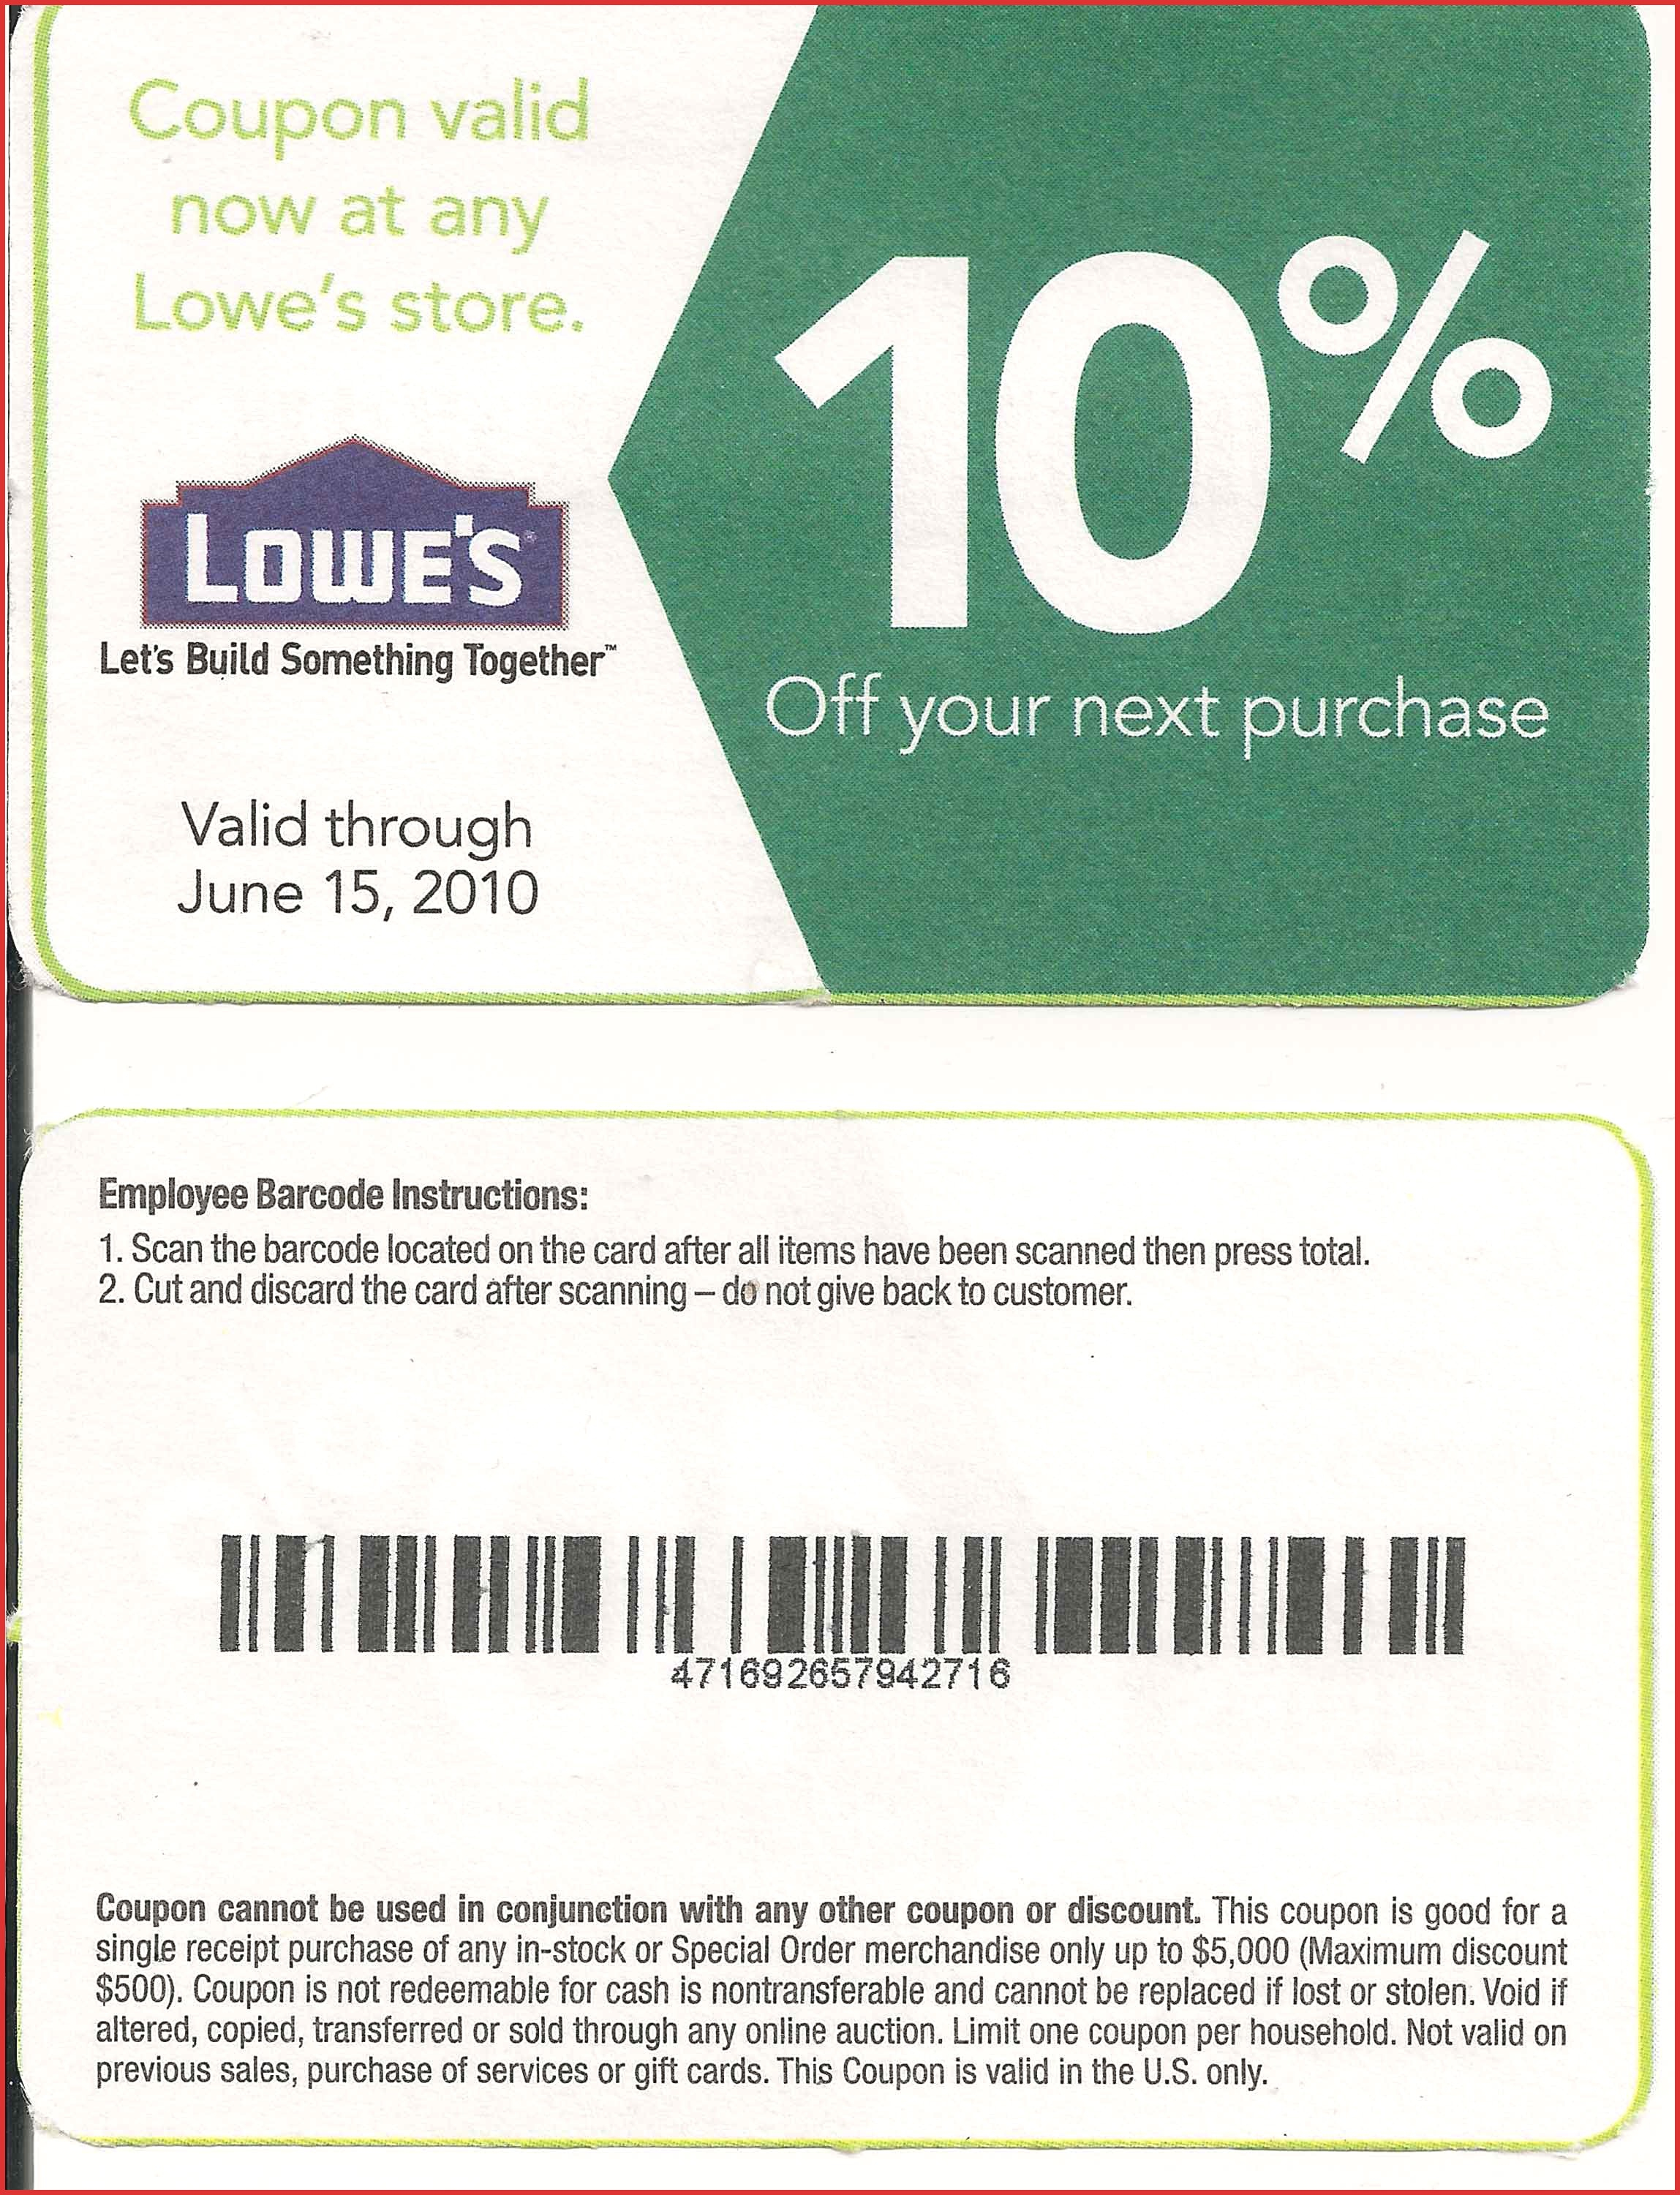 Lovely Lowes Online Coupons | Cobble Usa - Lowes 20 Printable Coupon Free